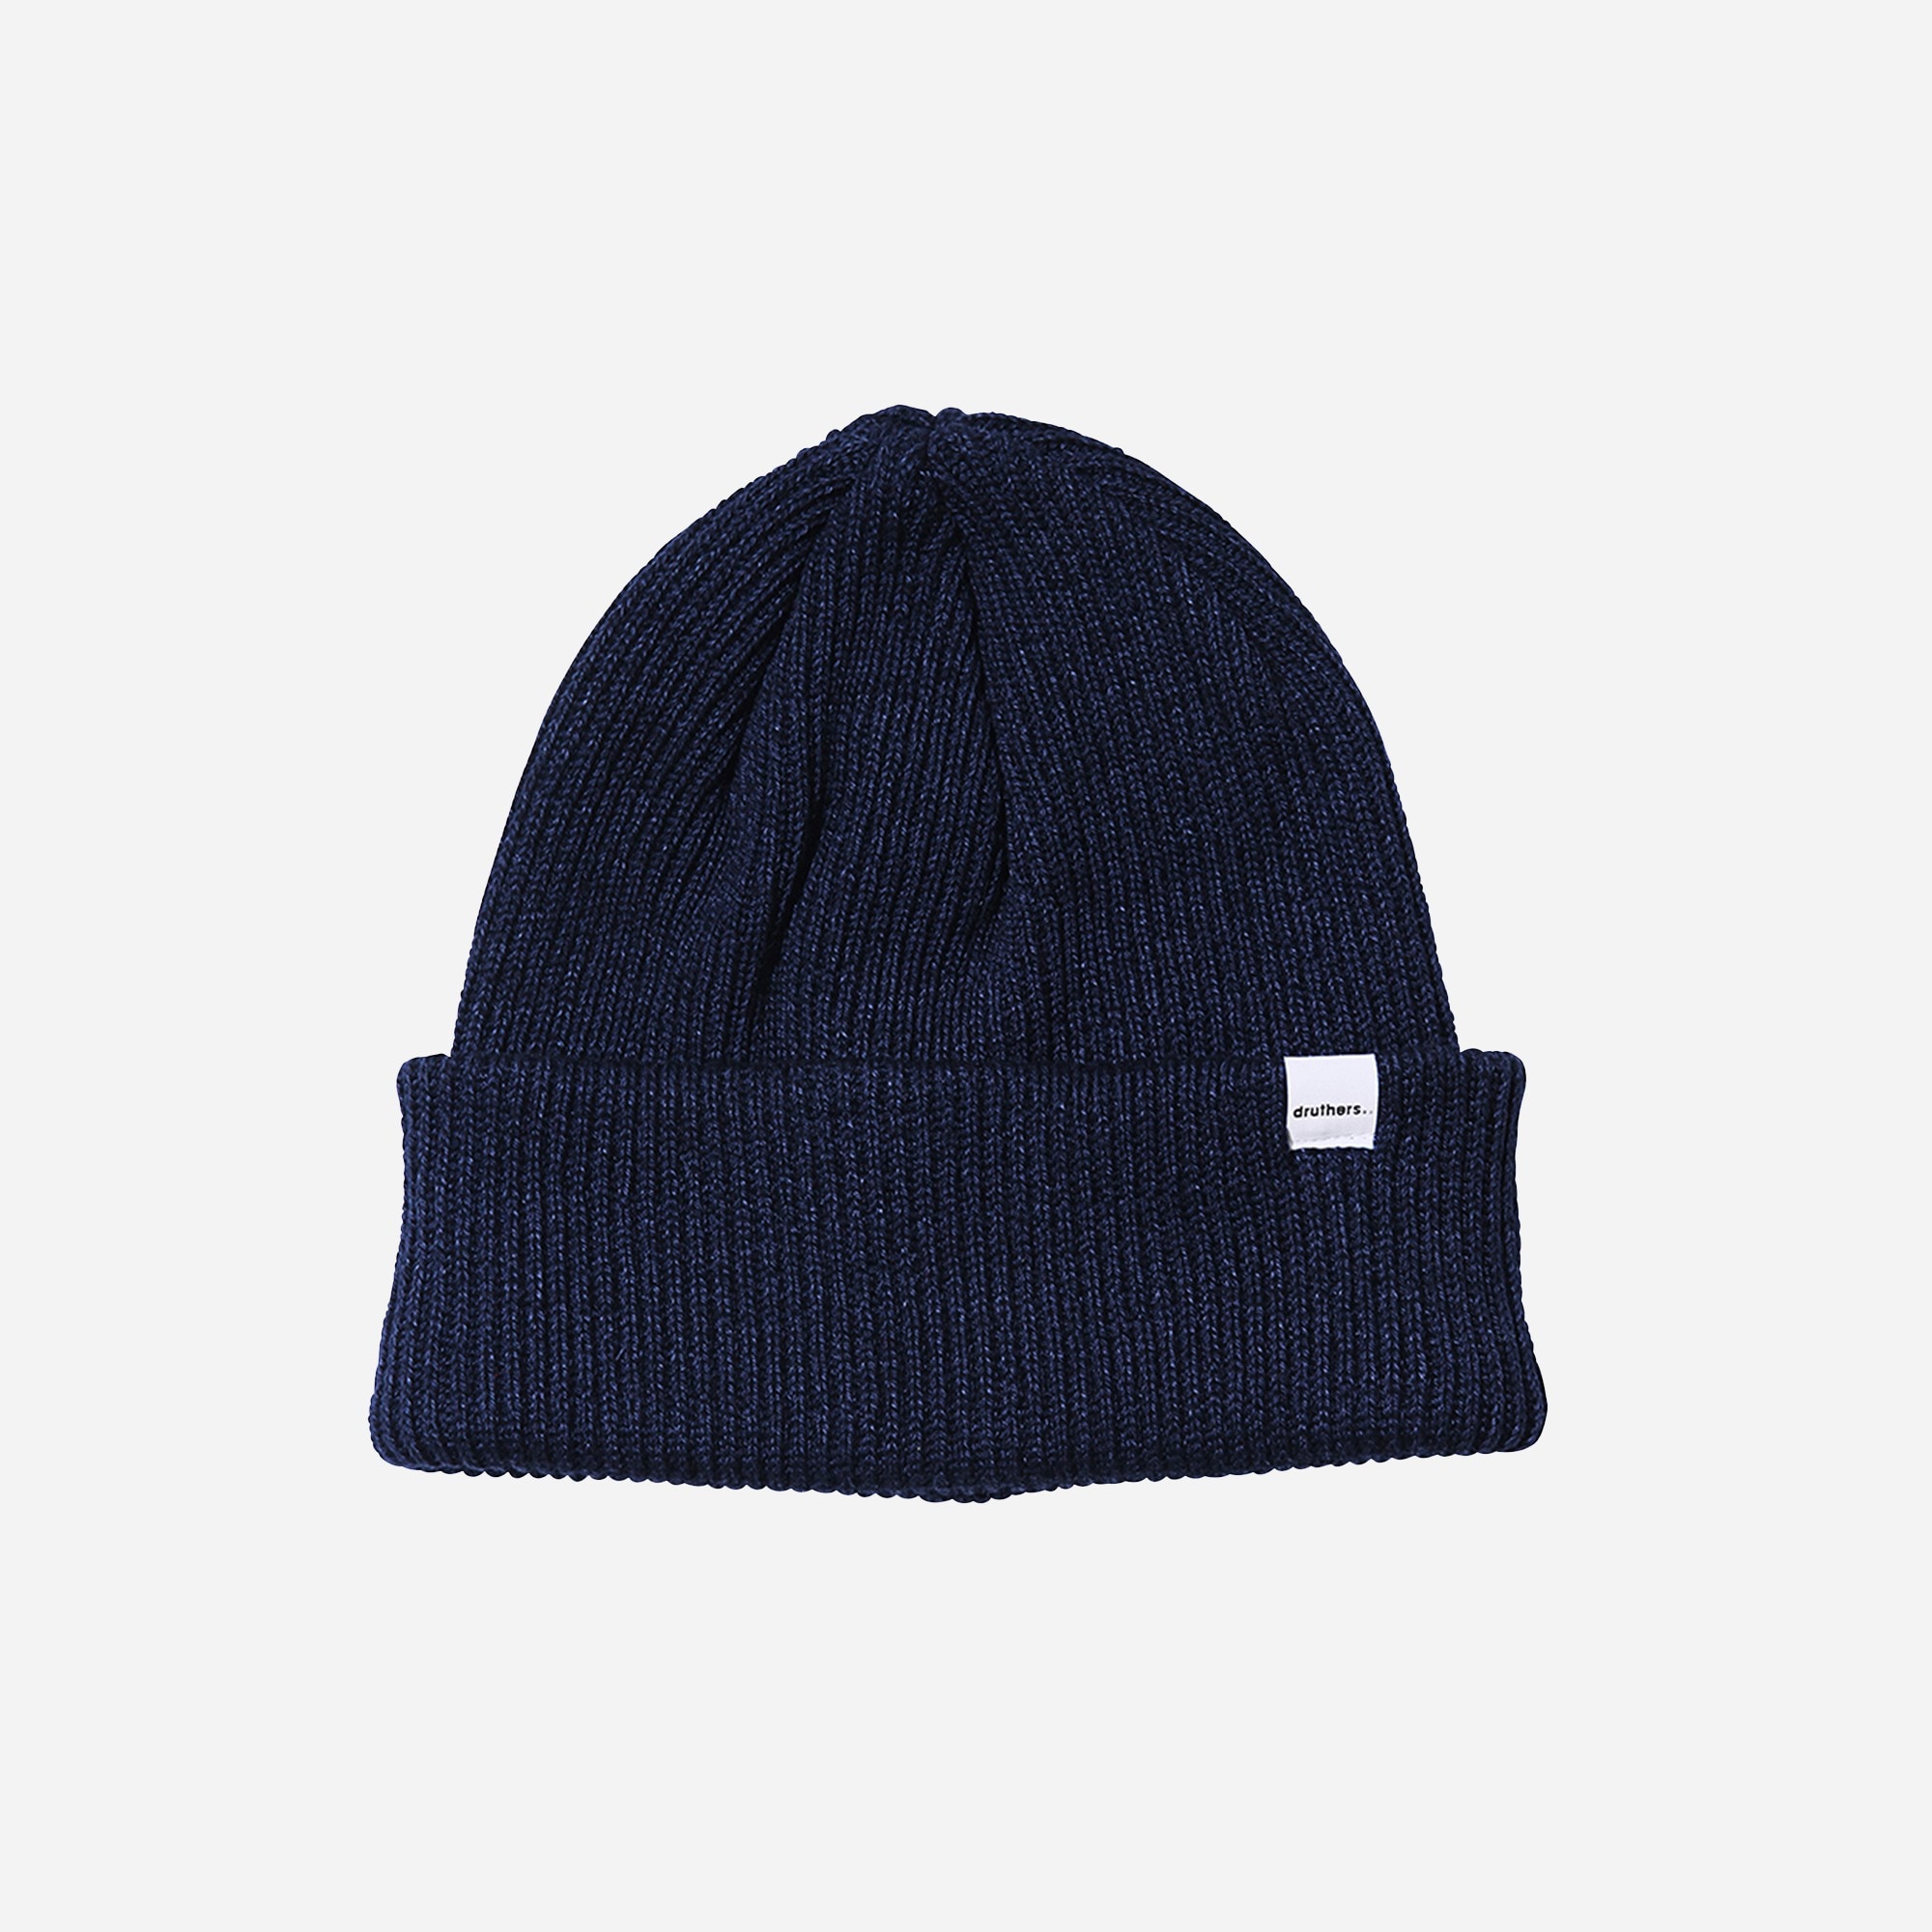 Jcrew Druthers recycled cotton knit beanie